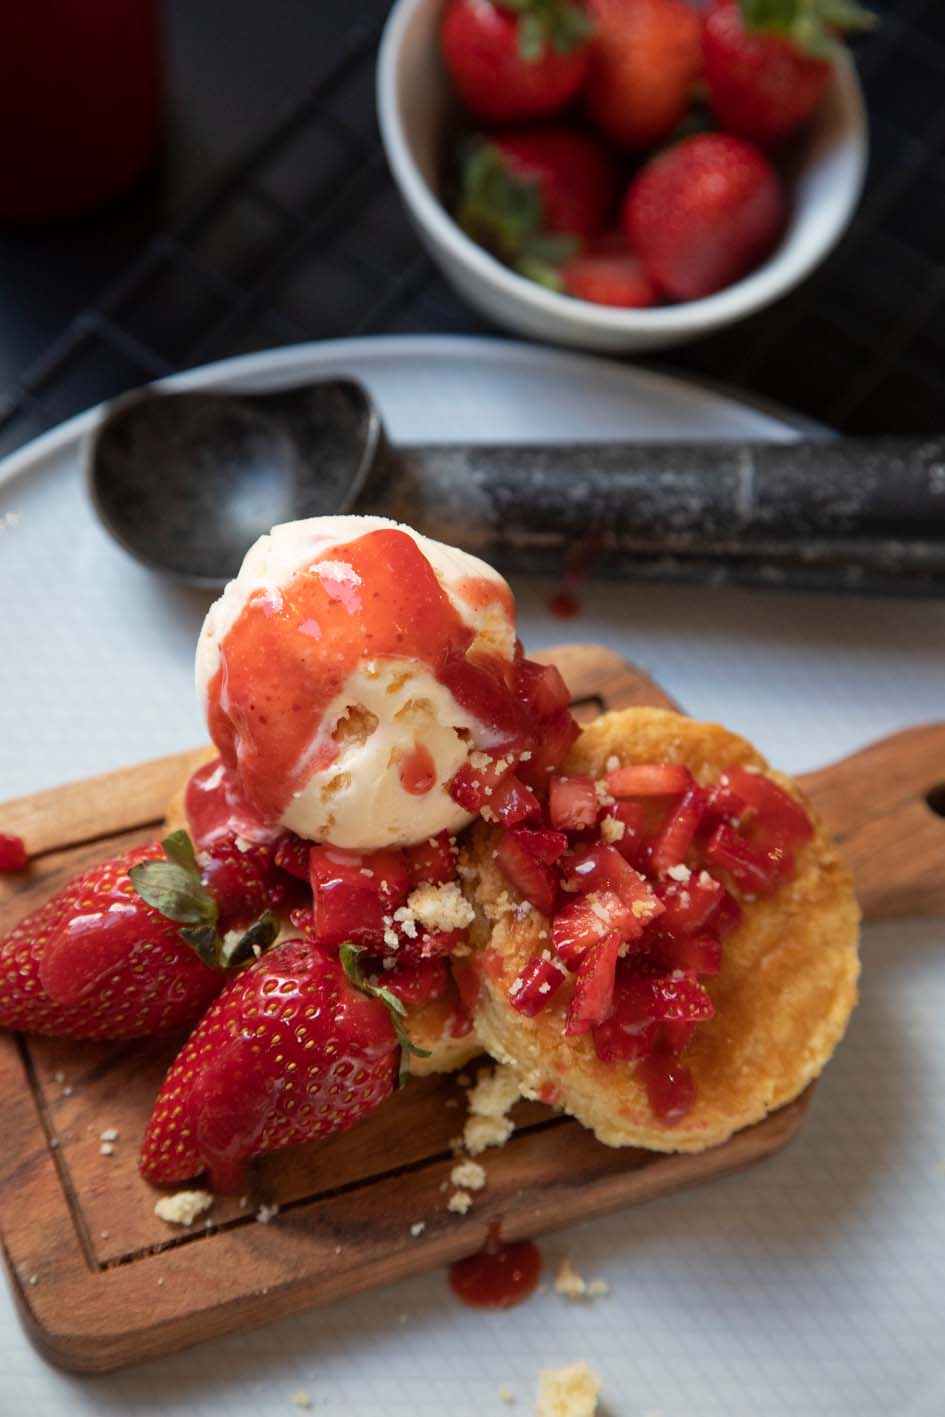 Strawberries and cream ice cream with traditional Dutch shortbread, strawberry sauce and fresh strawberries.